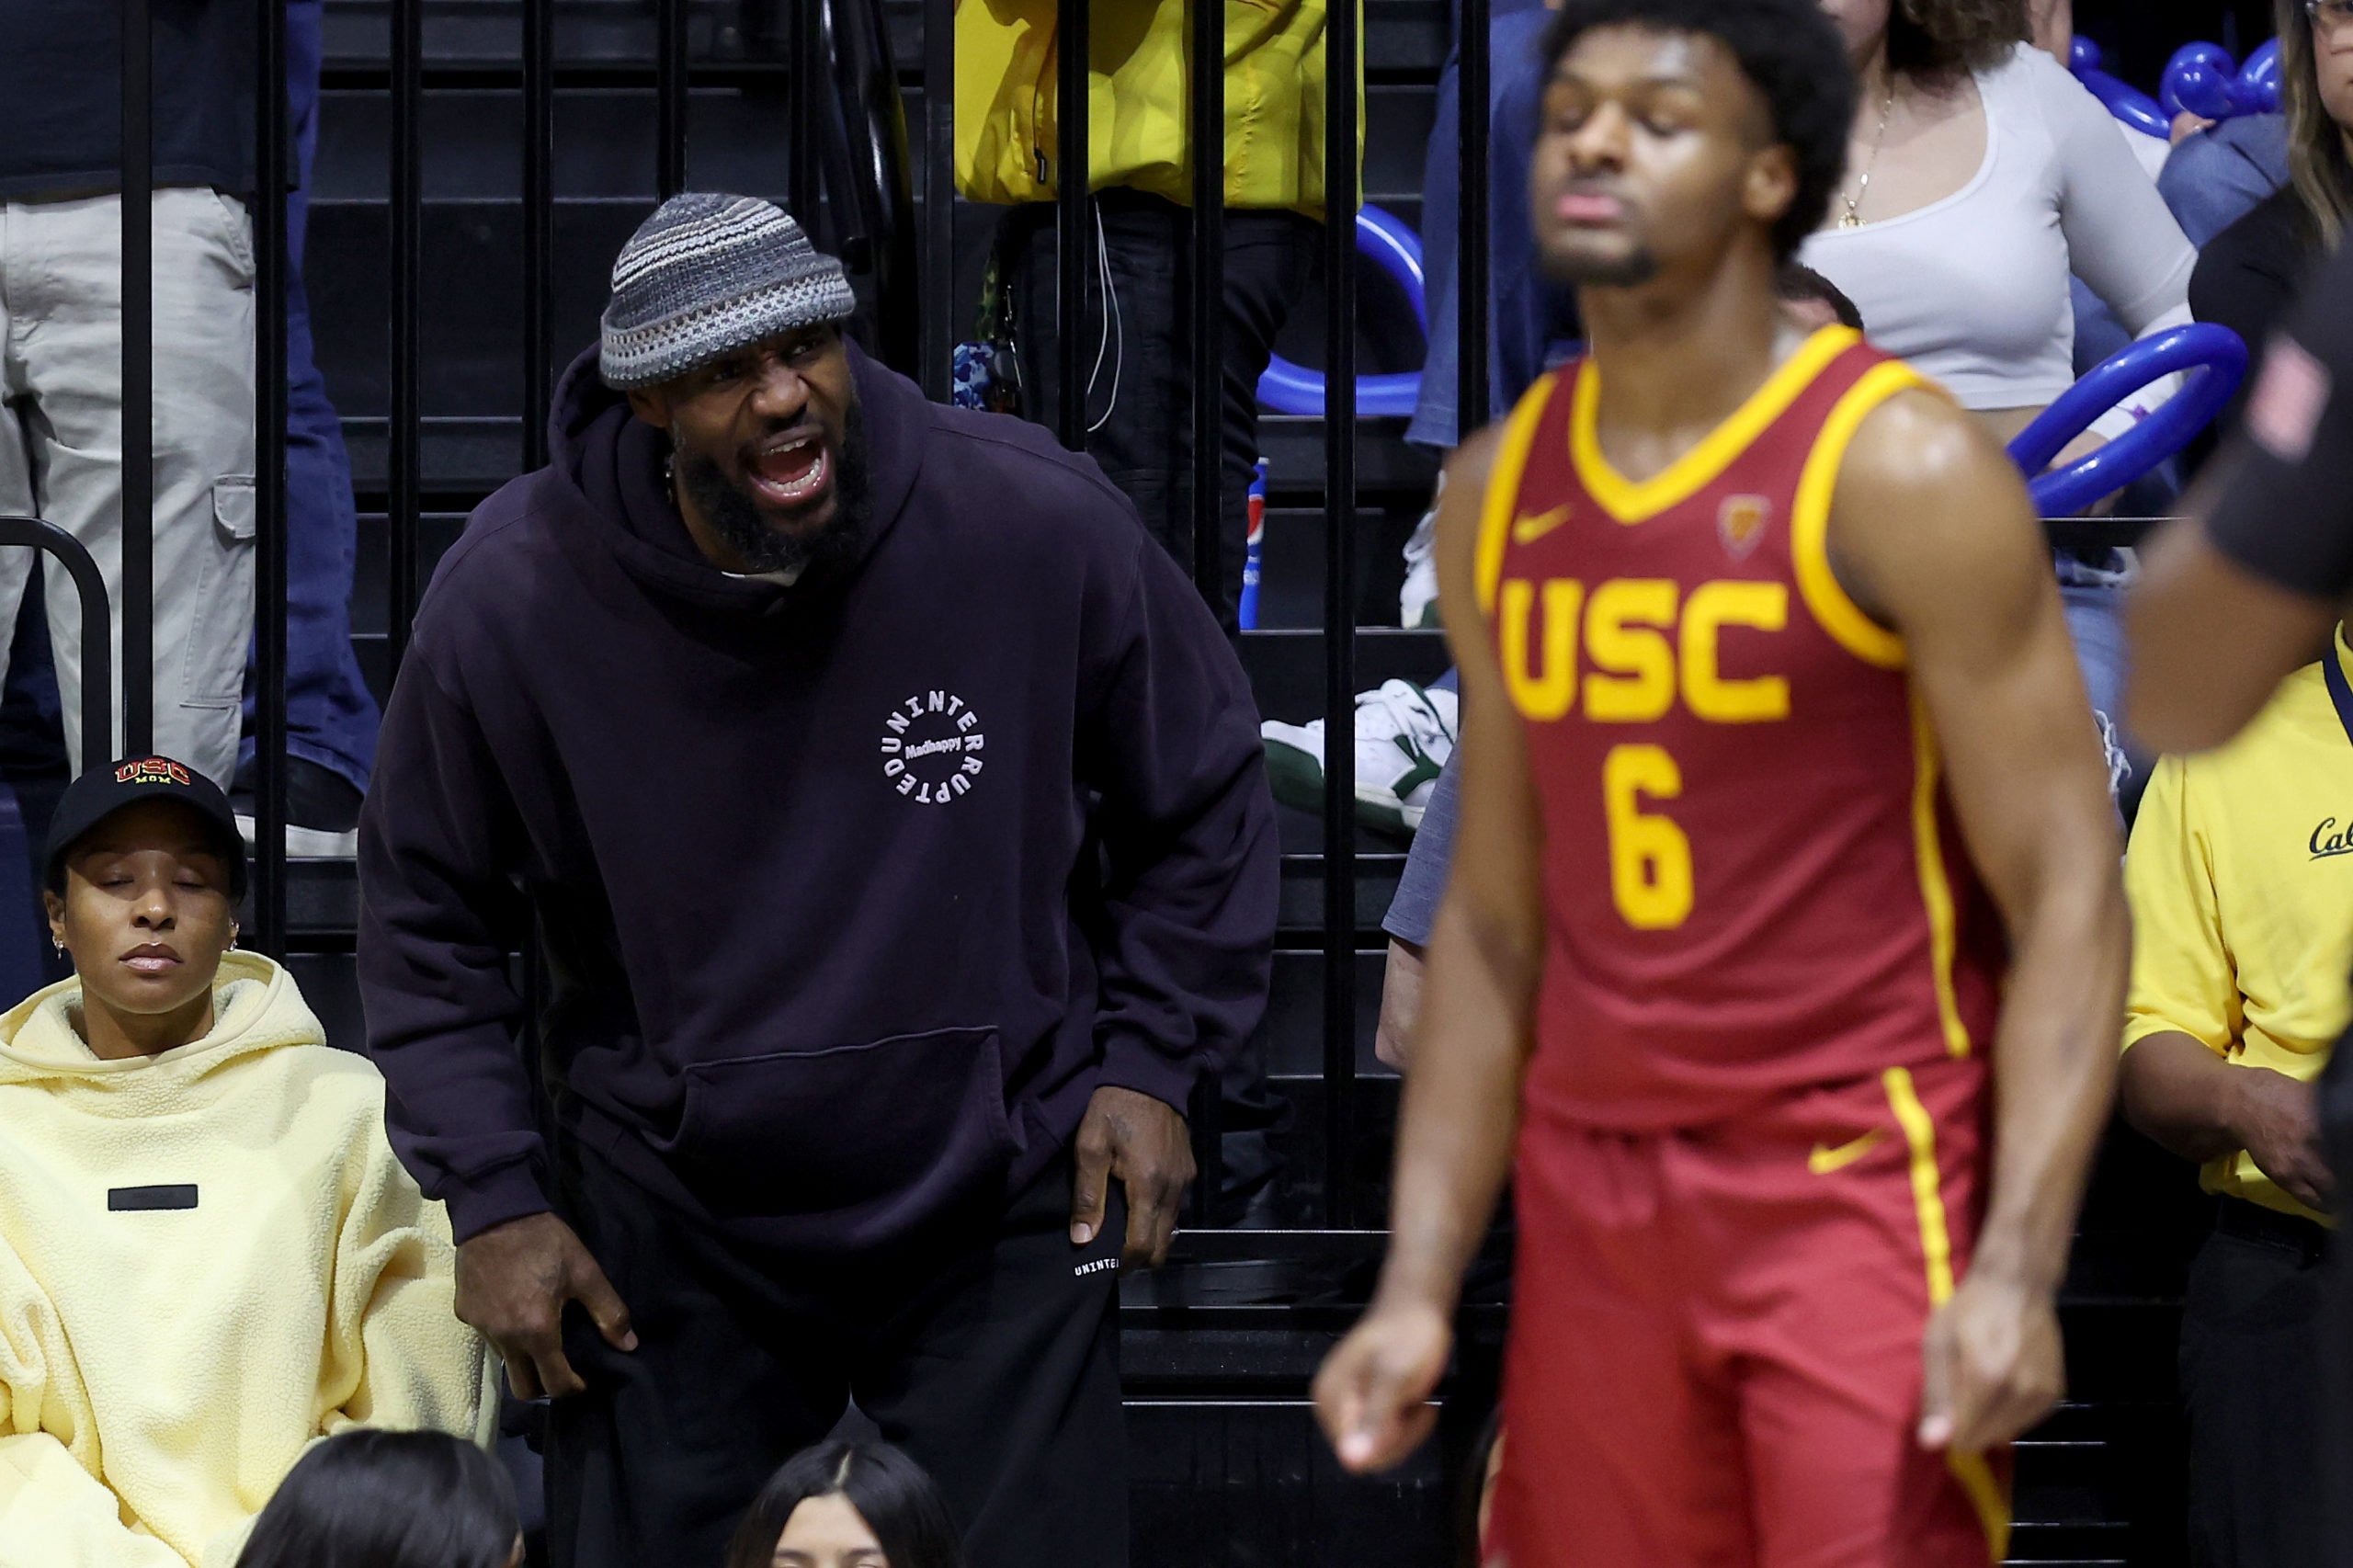 BERKELEY, CALIFORNIA - FEBRUARY 07: LeBron James #23 of the Los Angeles Lakers shouts to his son, Bronny James #6 of the USC Trojans, during Bronny's game against the California Golden Bears at Haas Pavilion on February 07, 2024 in Berkeley, California. Ezra Shaw/Getty Images